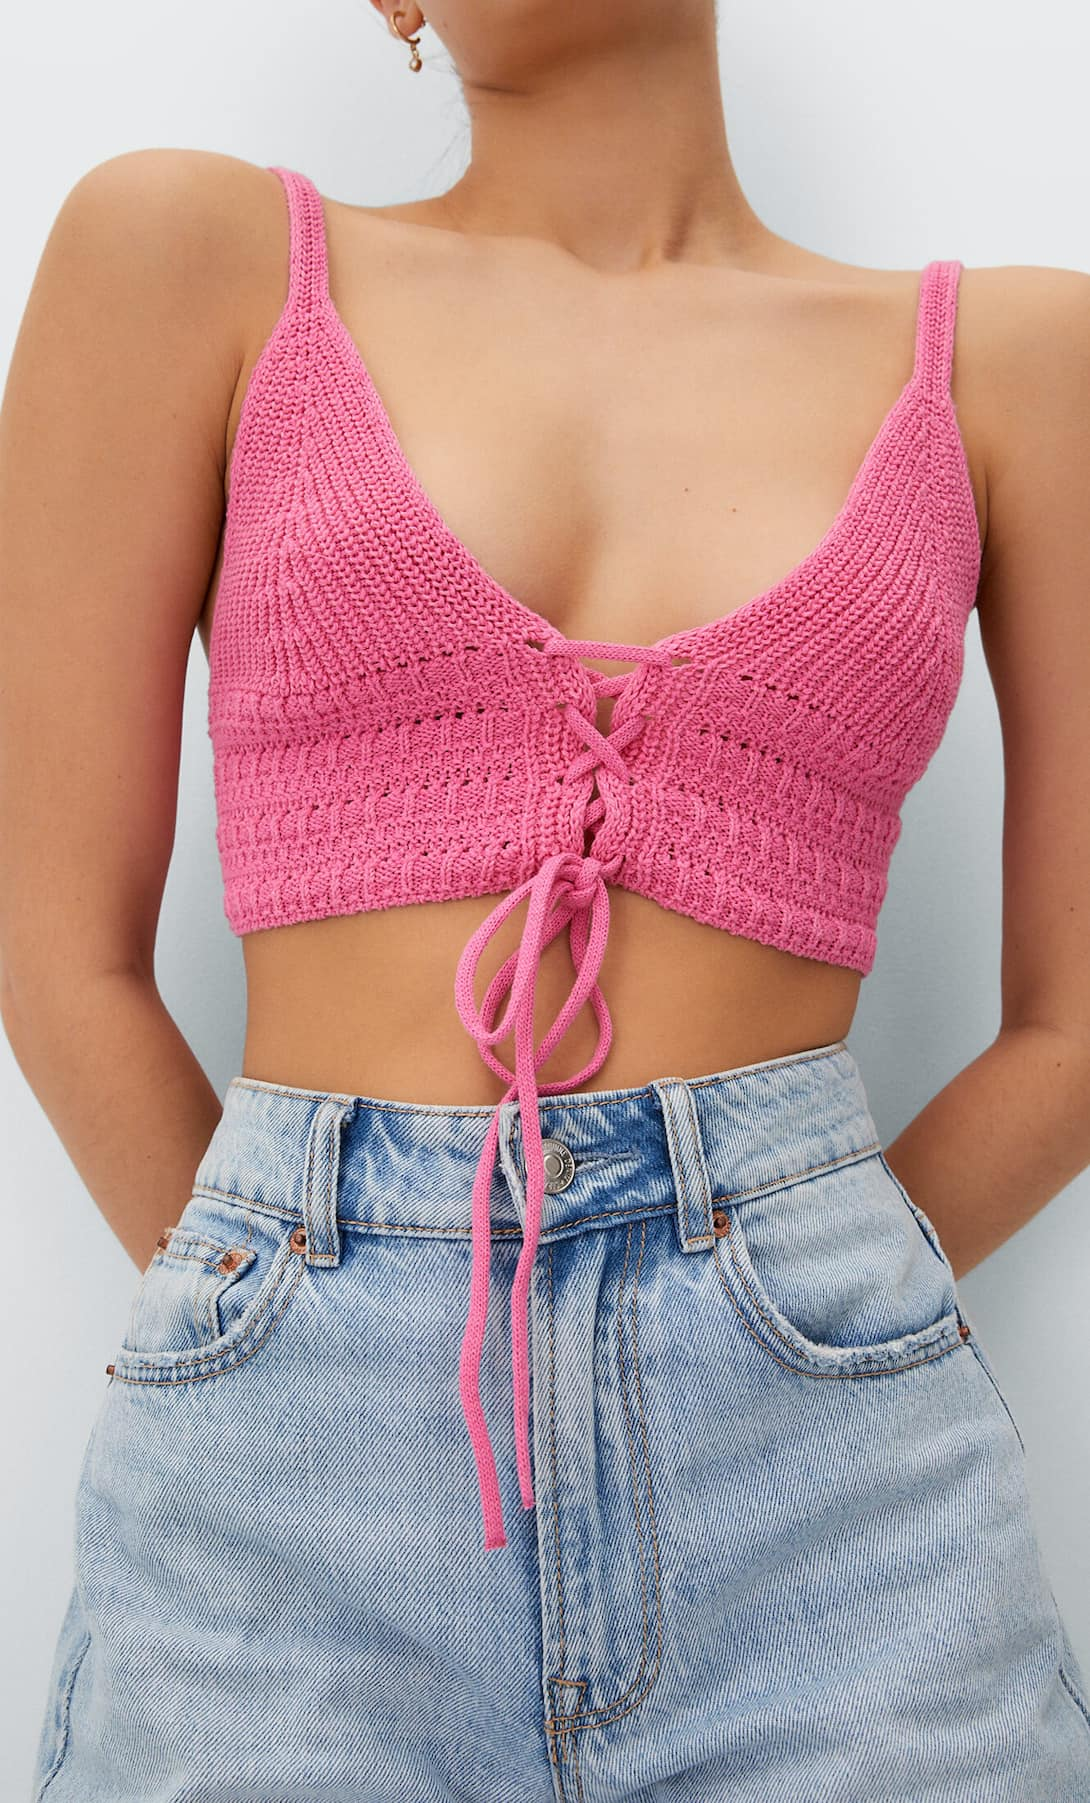 Knitted Corchet Small Tank Top Vest for Women